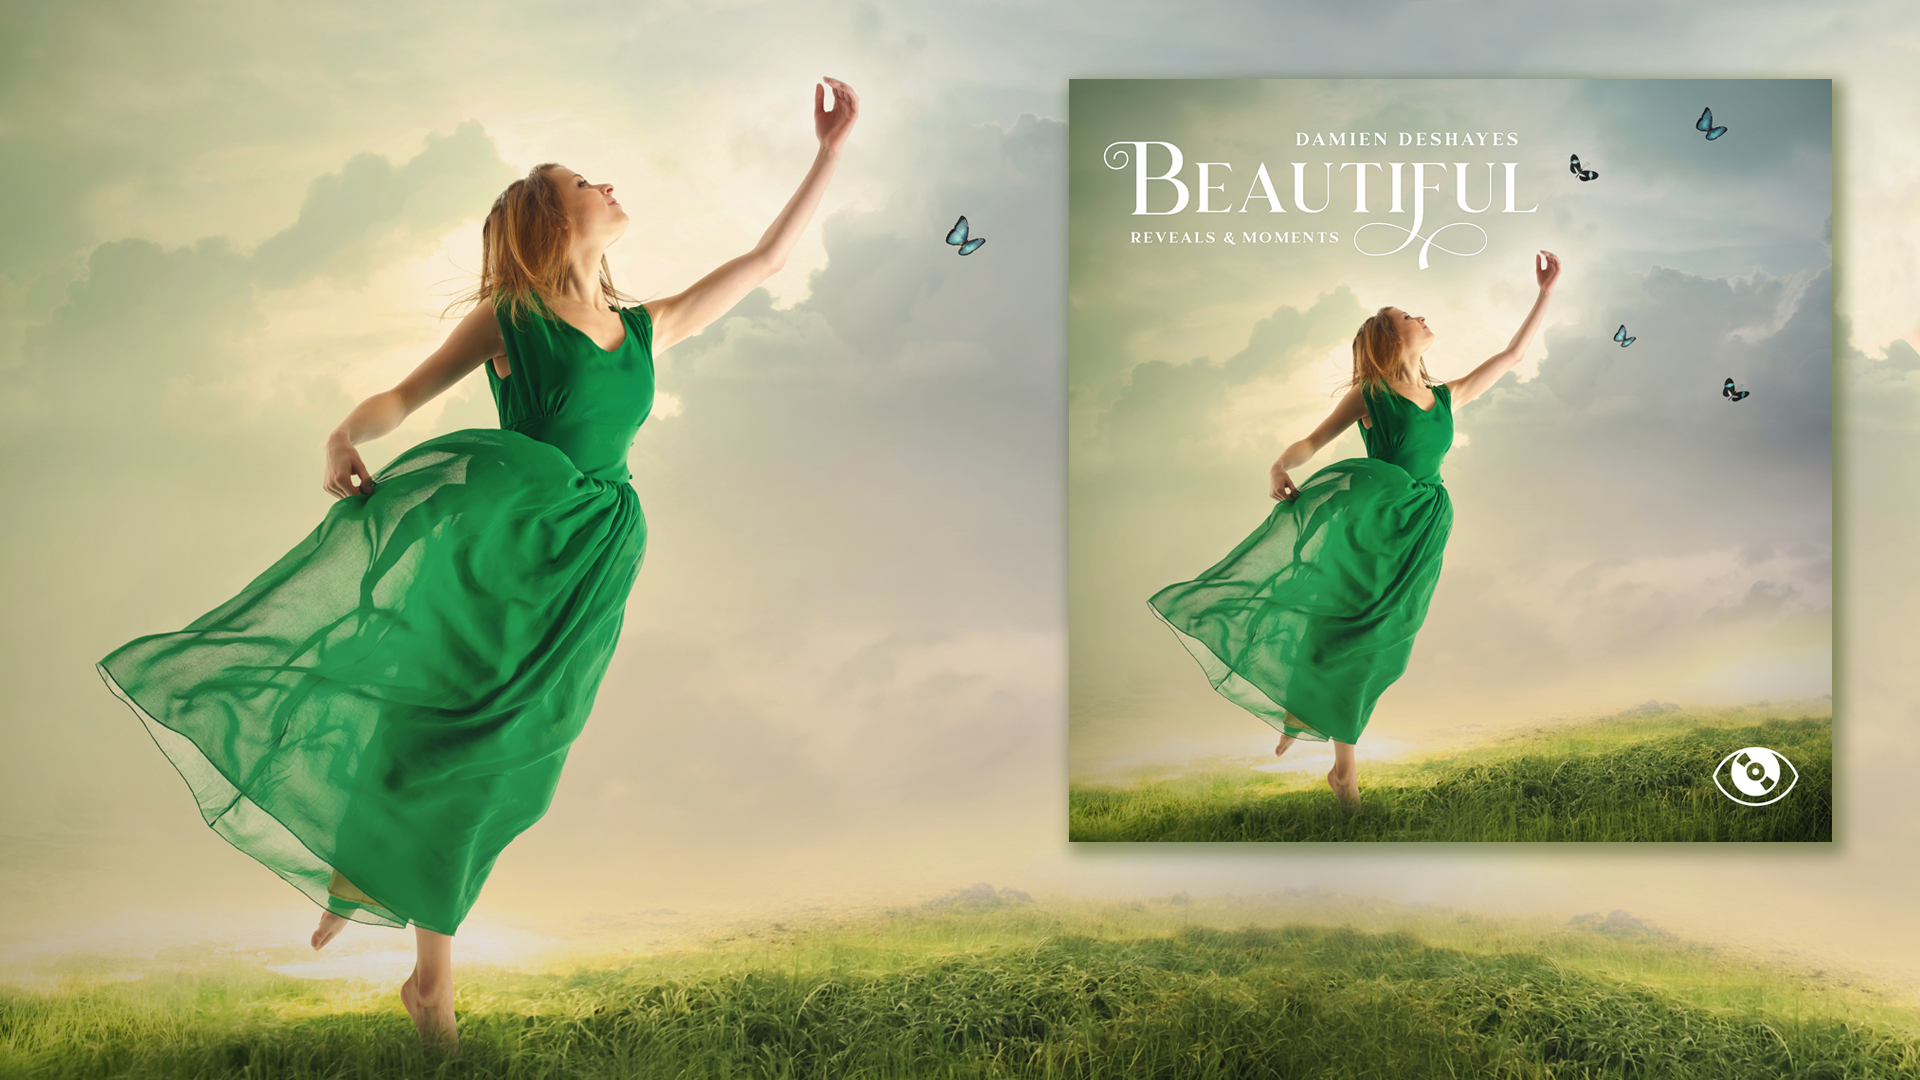 &#8220;Beautiful Reveals &#038; Moments&#8221; (Superpitch / BMG) is out now!